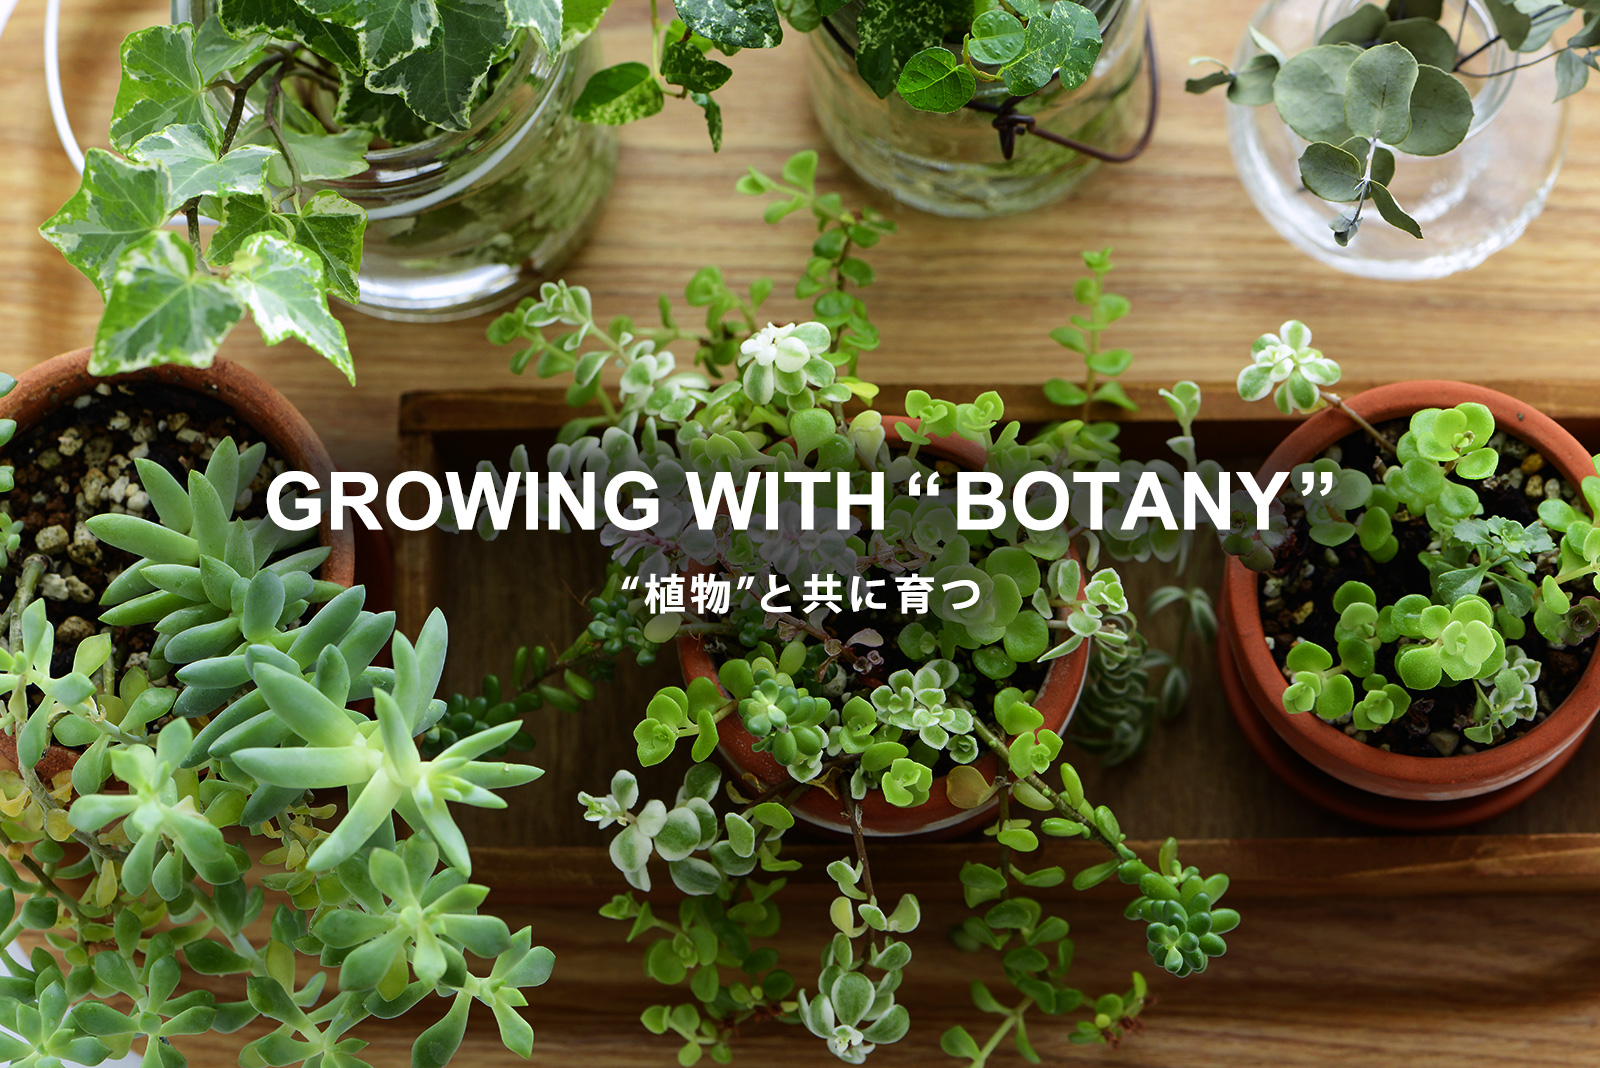 growing with botany 植物と共に育つ